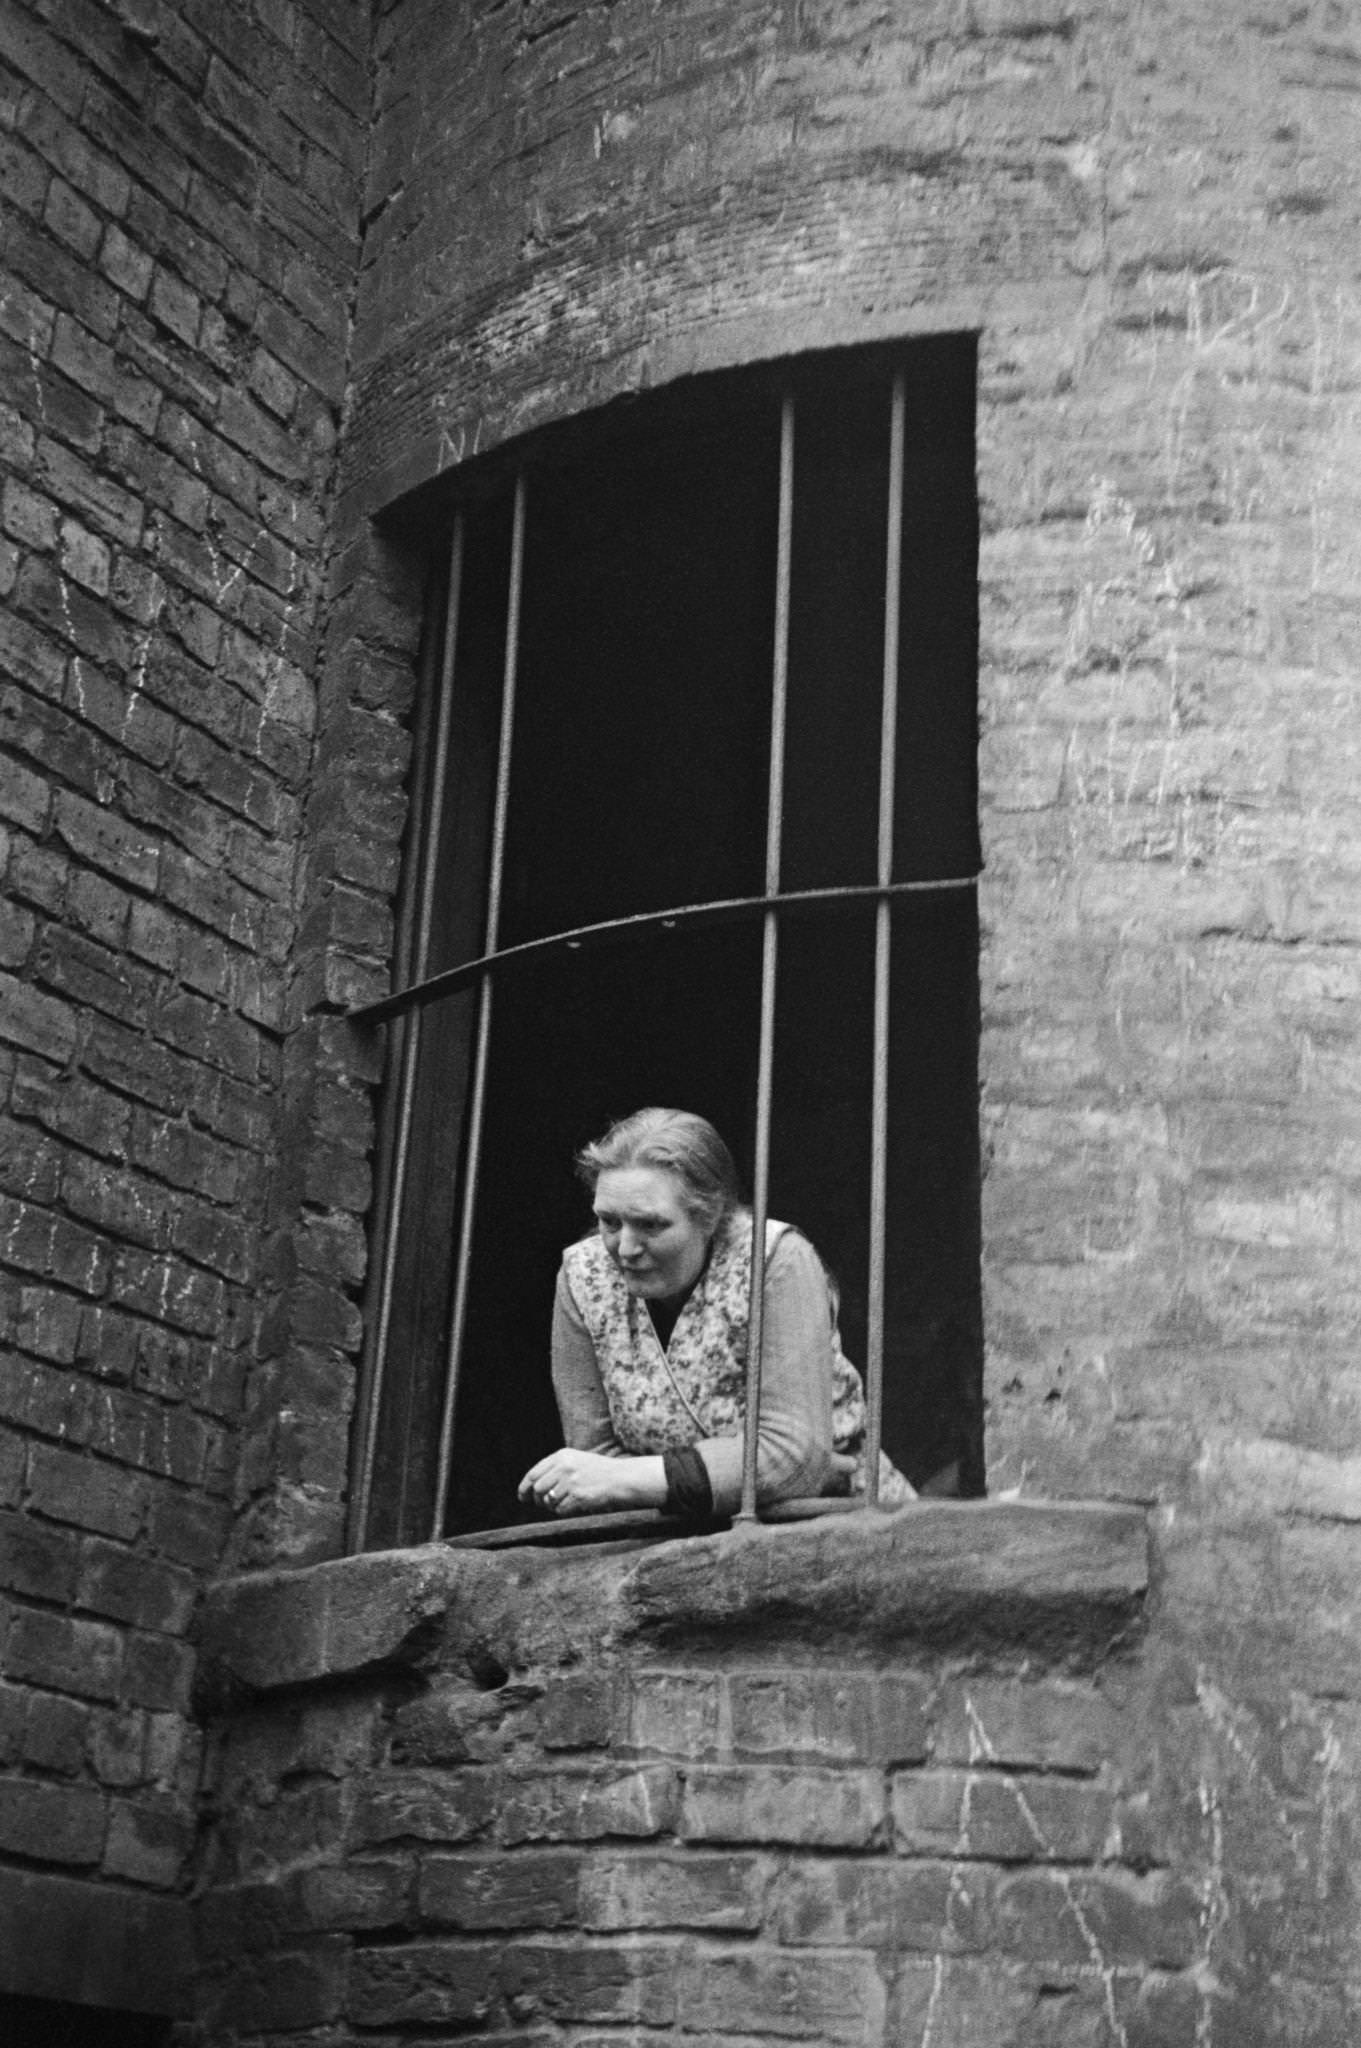 A woman looks down from a window in the Gorbals area of Glasgow, 1948